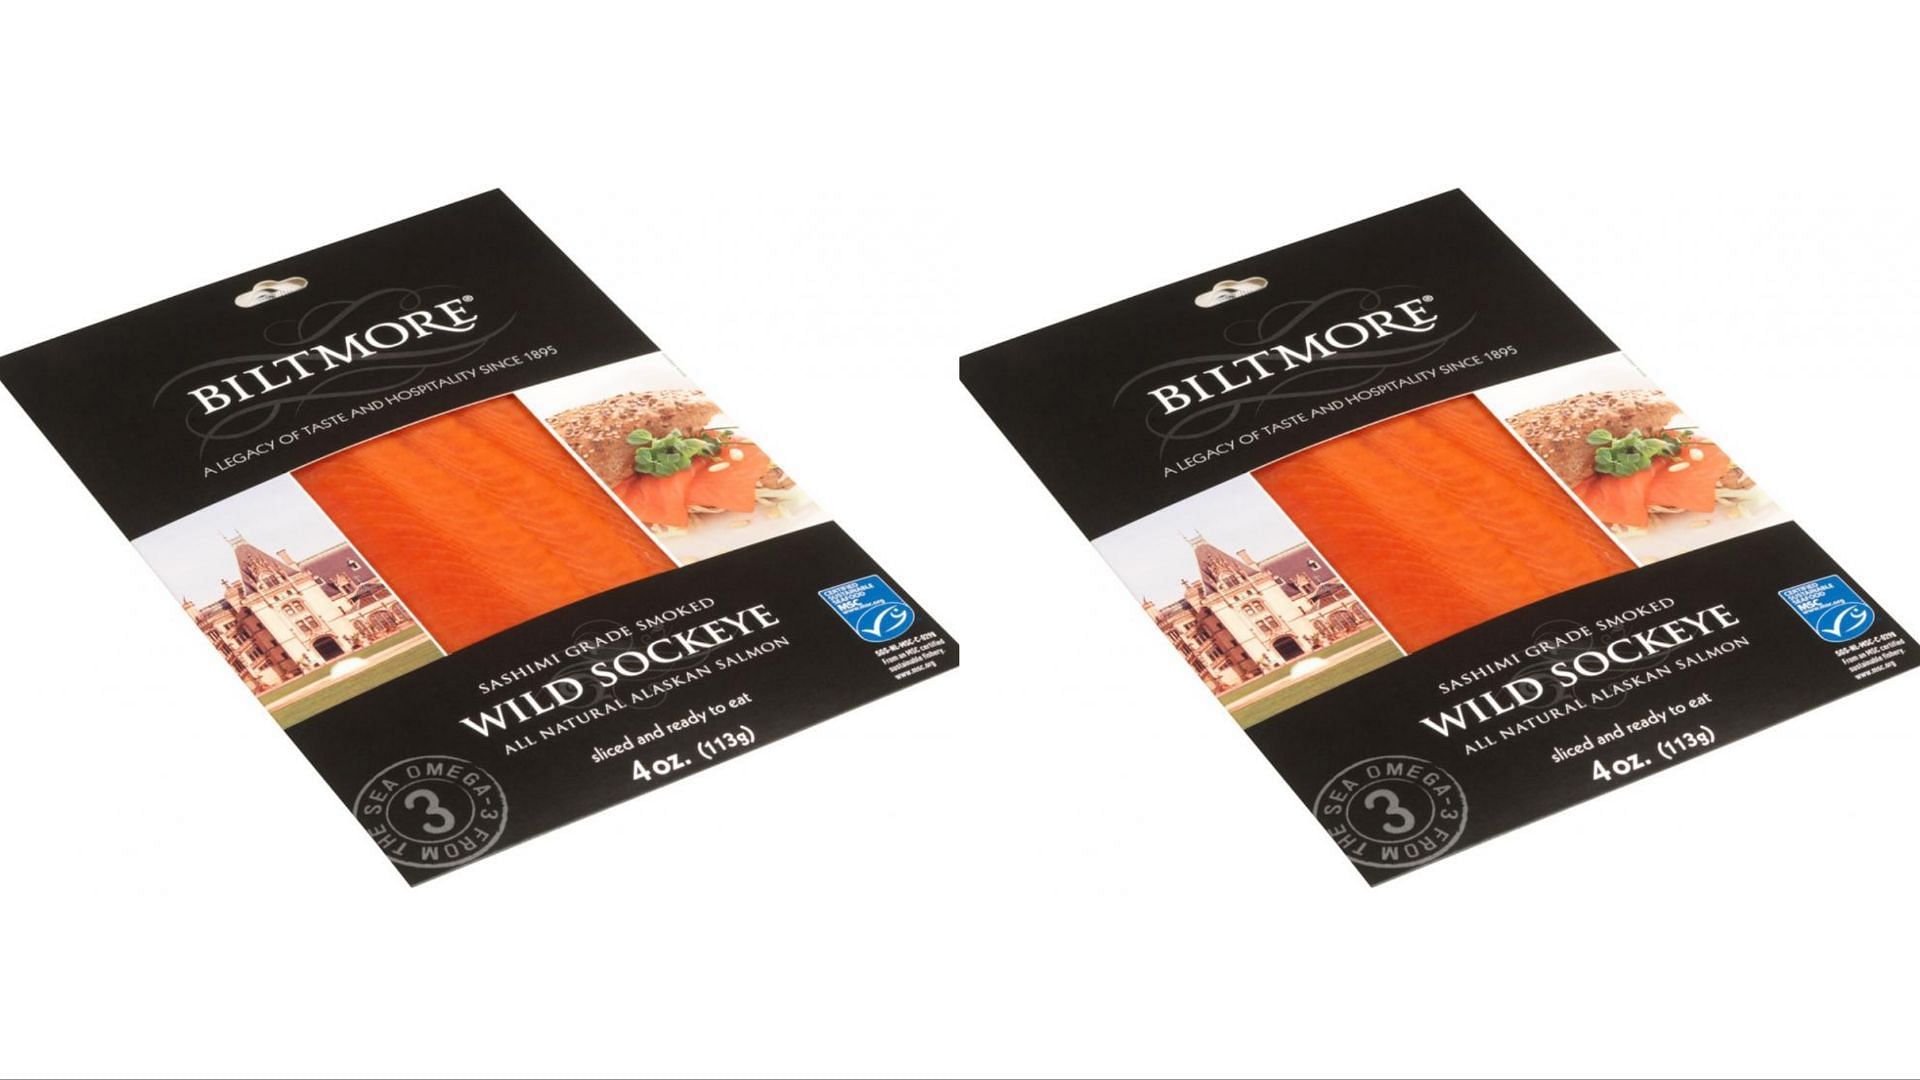 the recalled packages of Biltmore Smoked Sockeye Salmon can be returned to the store of purchase for a refund (Image via FDA/Seven Seas International USA, LLC)